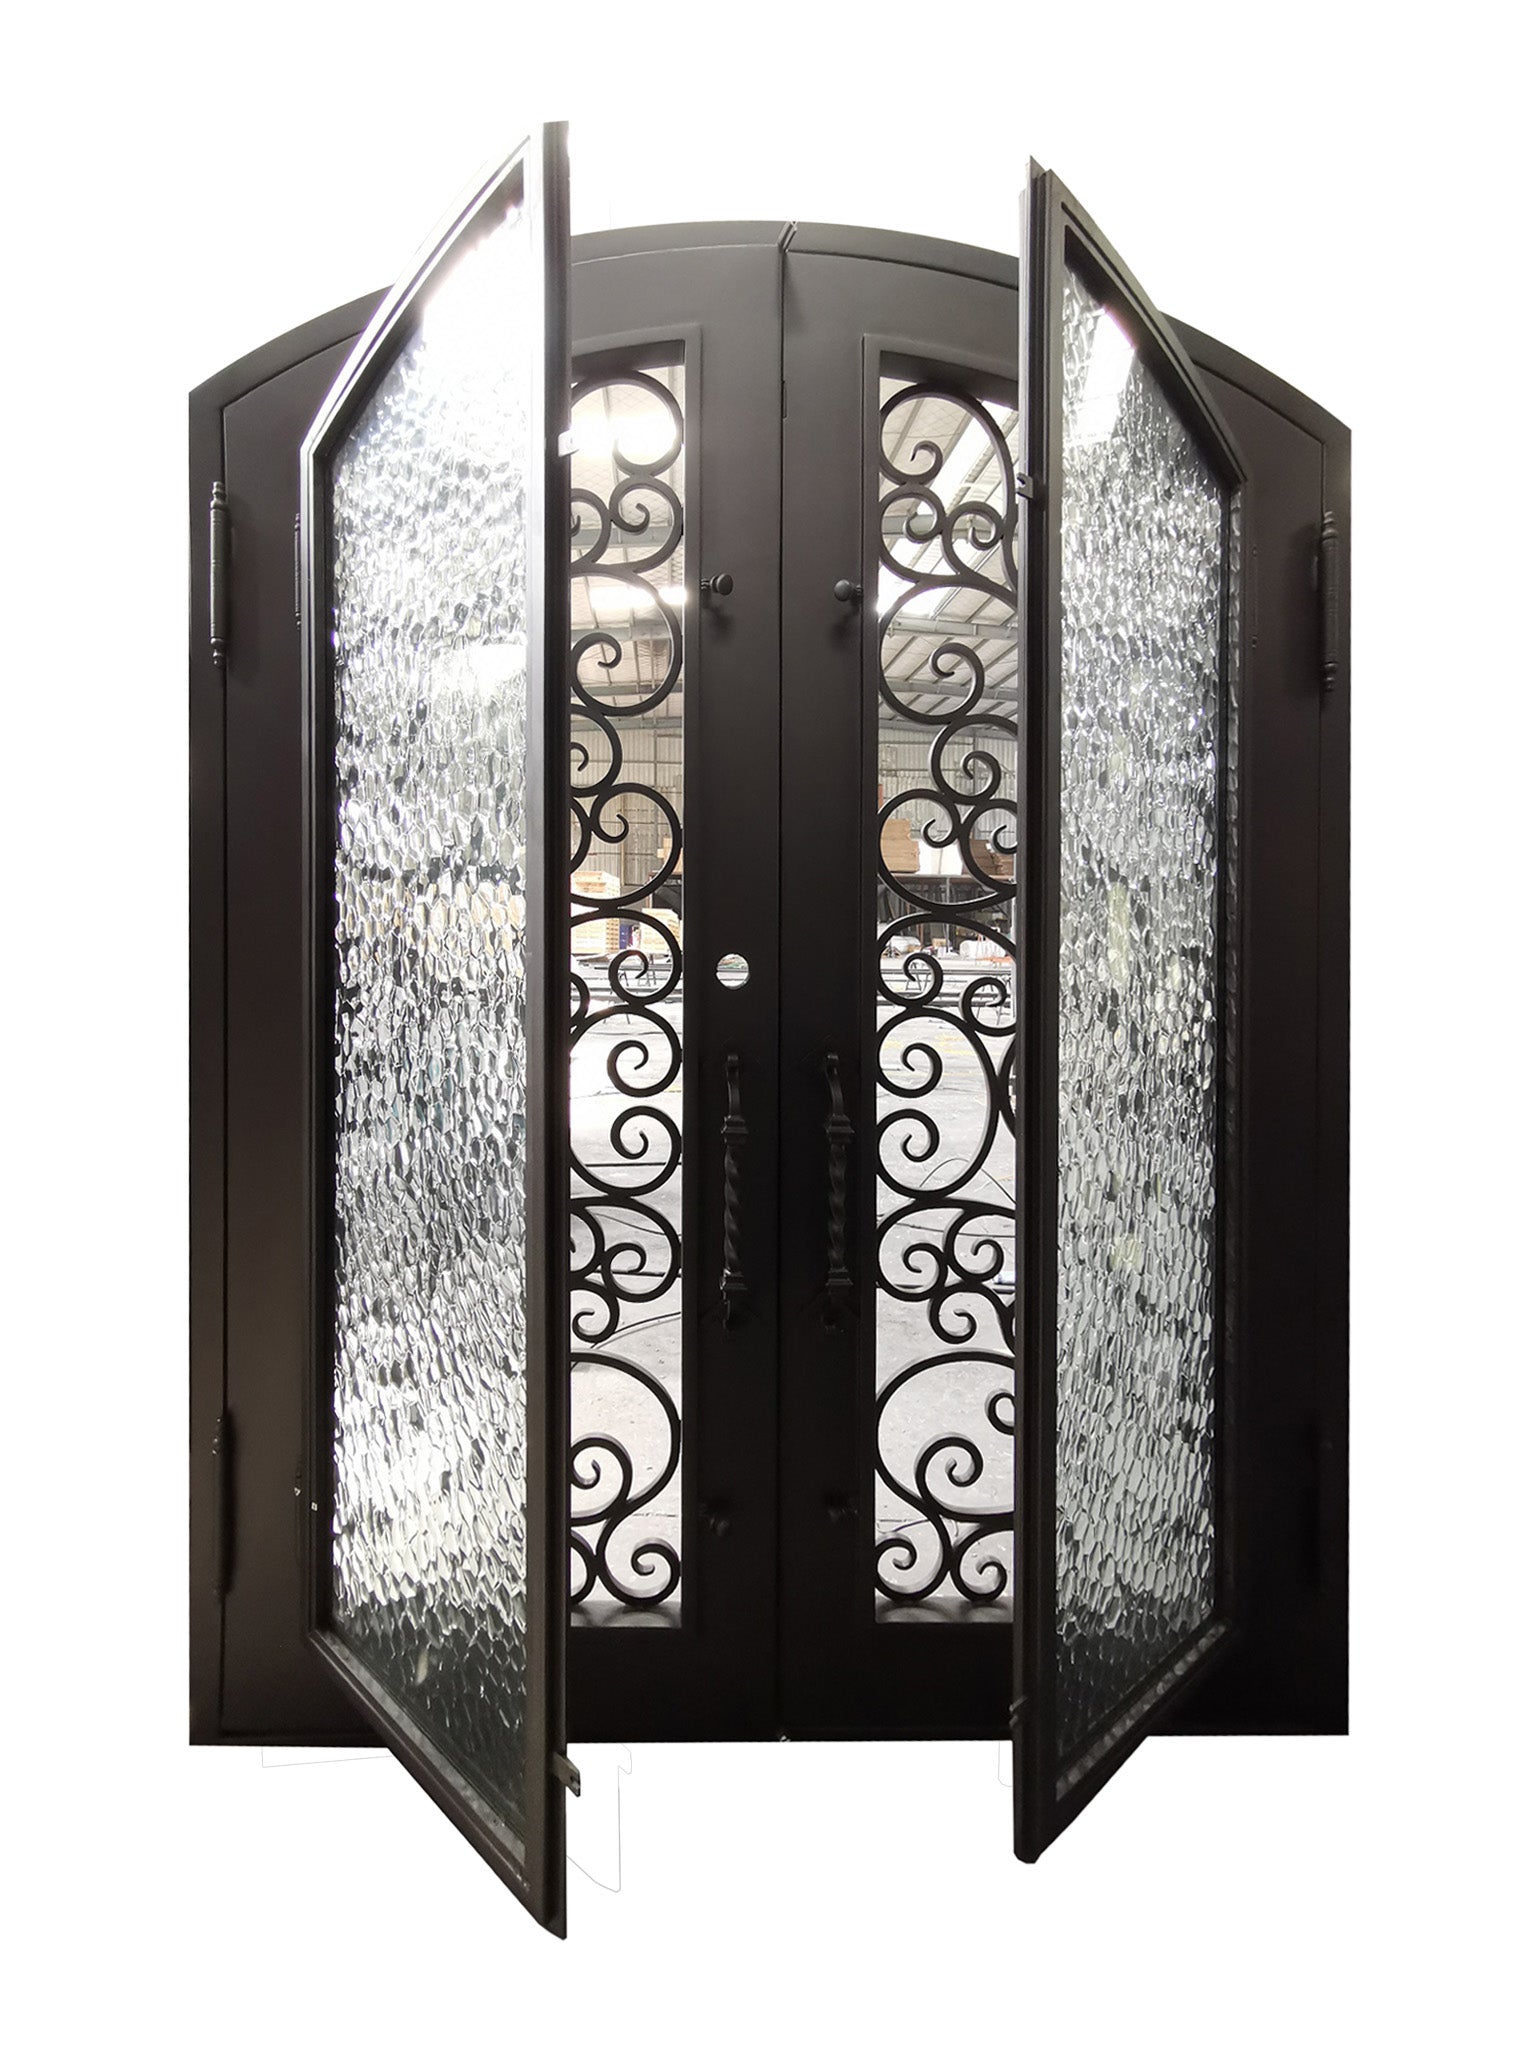 Cisco Model Double Front Entry Iron Door With Tempered Water Cube Glass Dark Bronze Finish - AAWAIZ IMPORTS